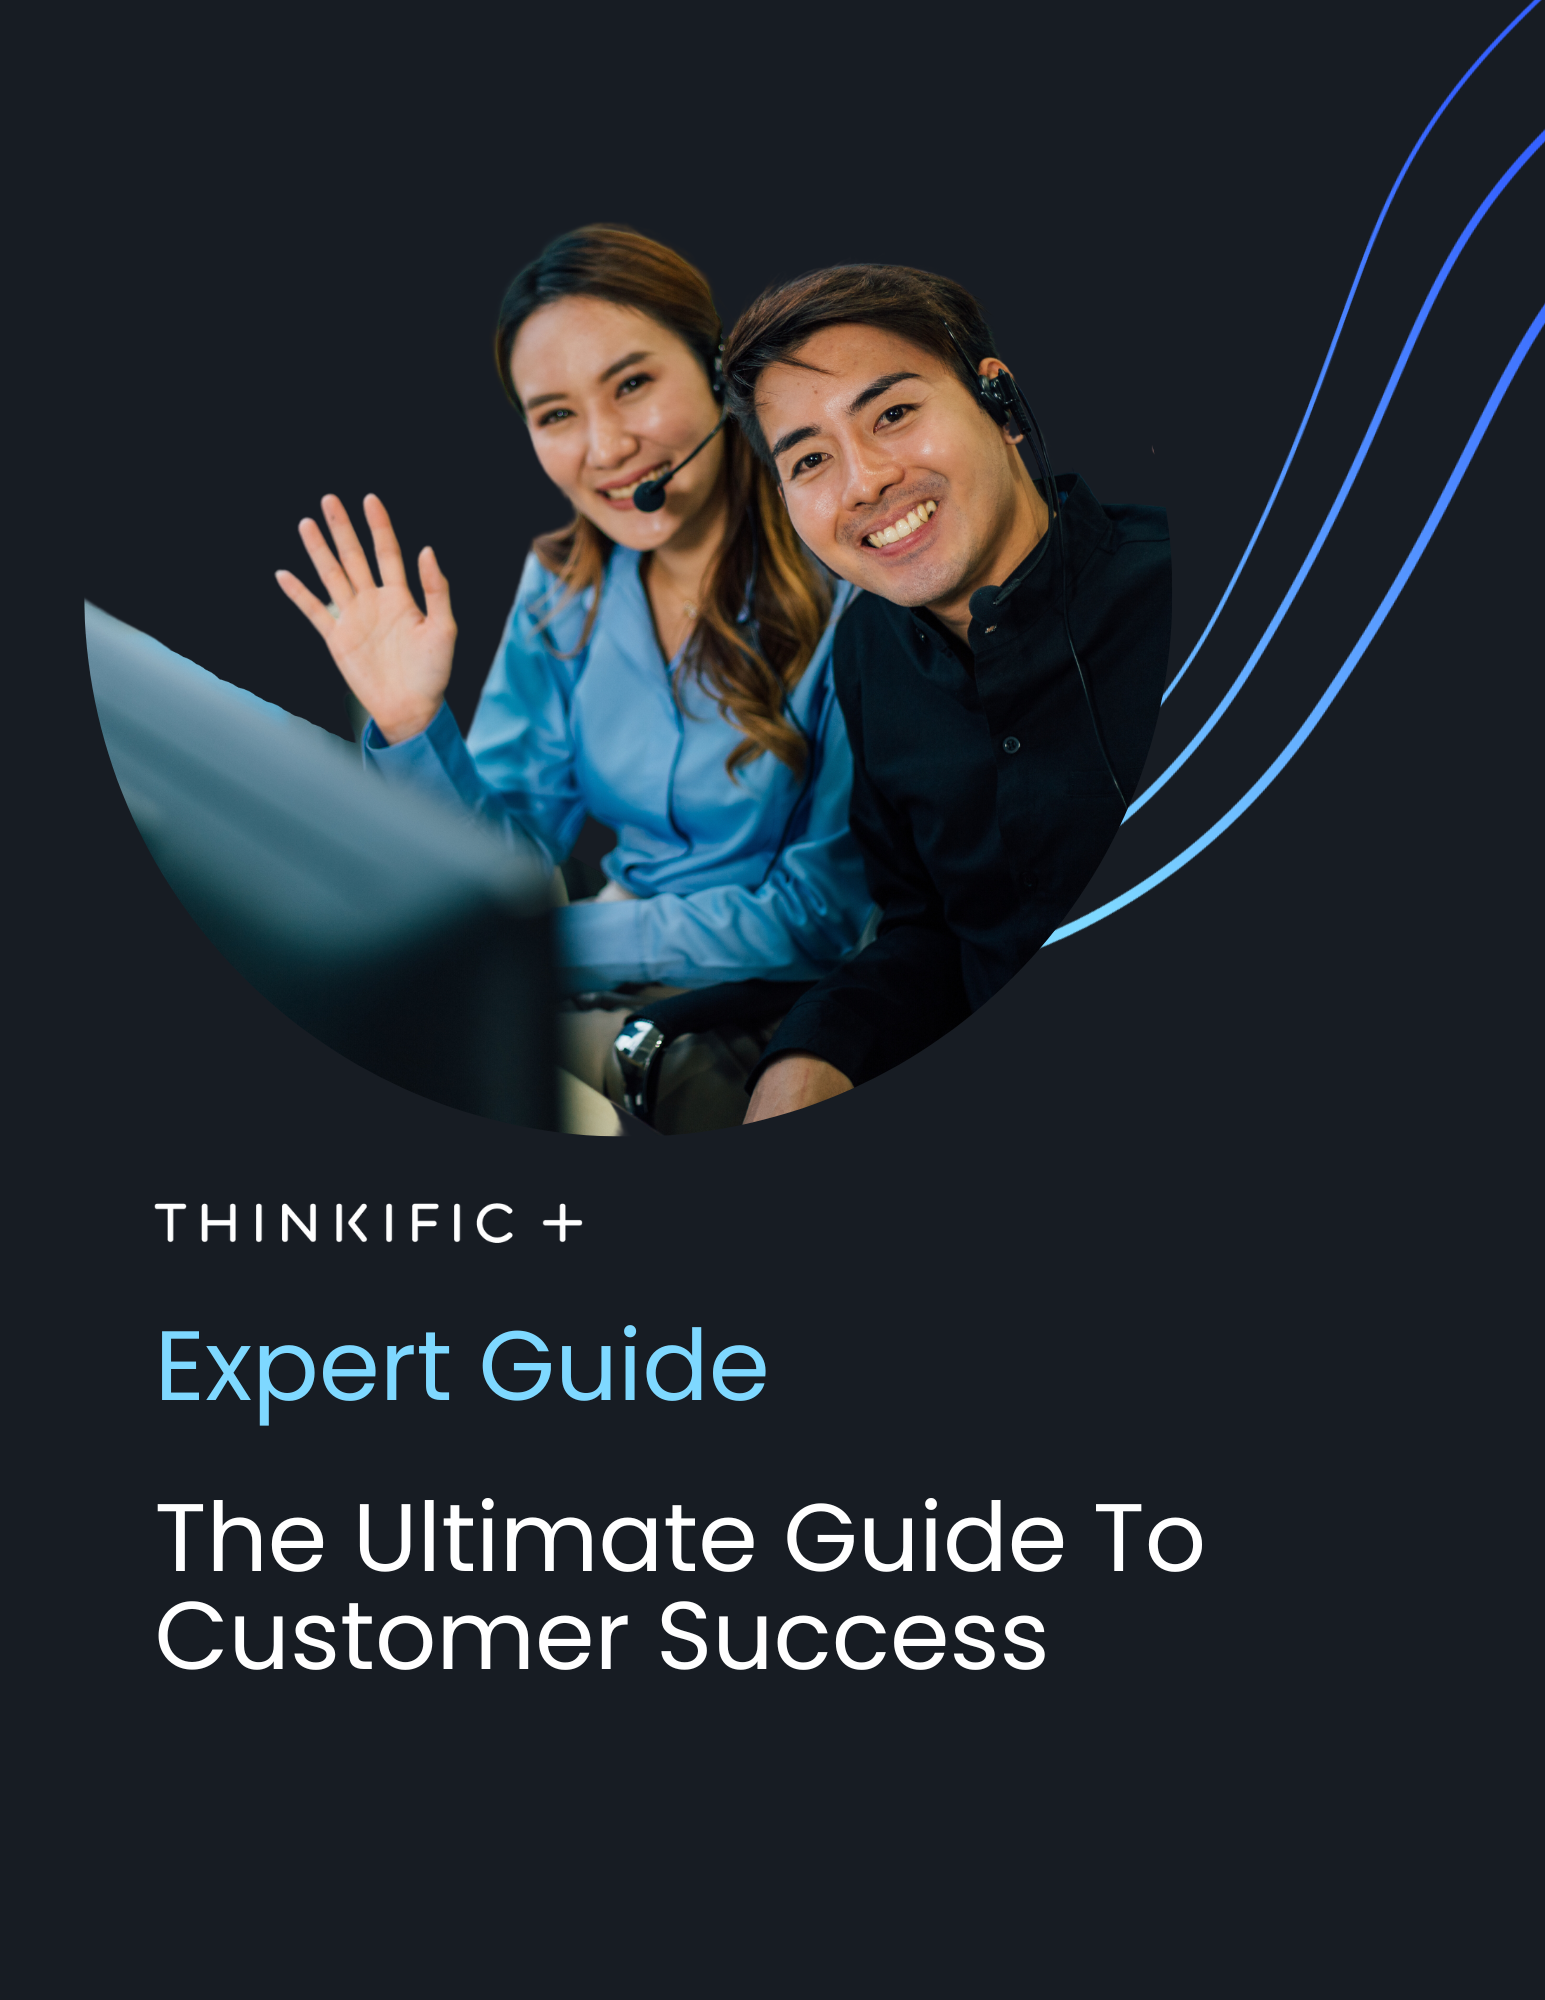 The Ultimate Guide to Customer Success: presented by Thinkific Plus